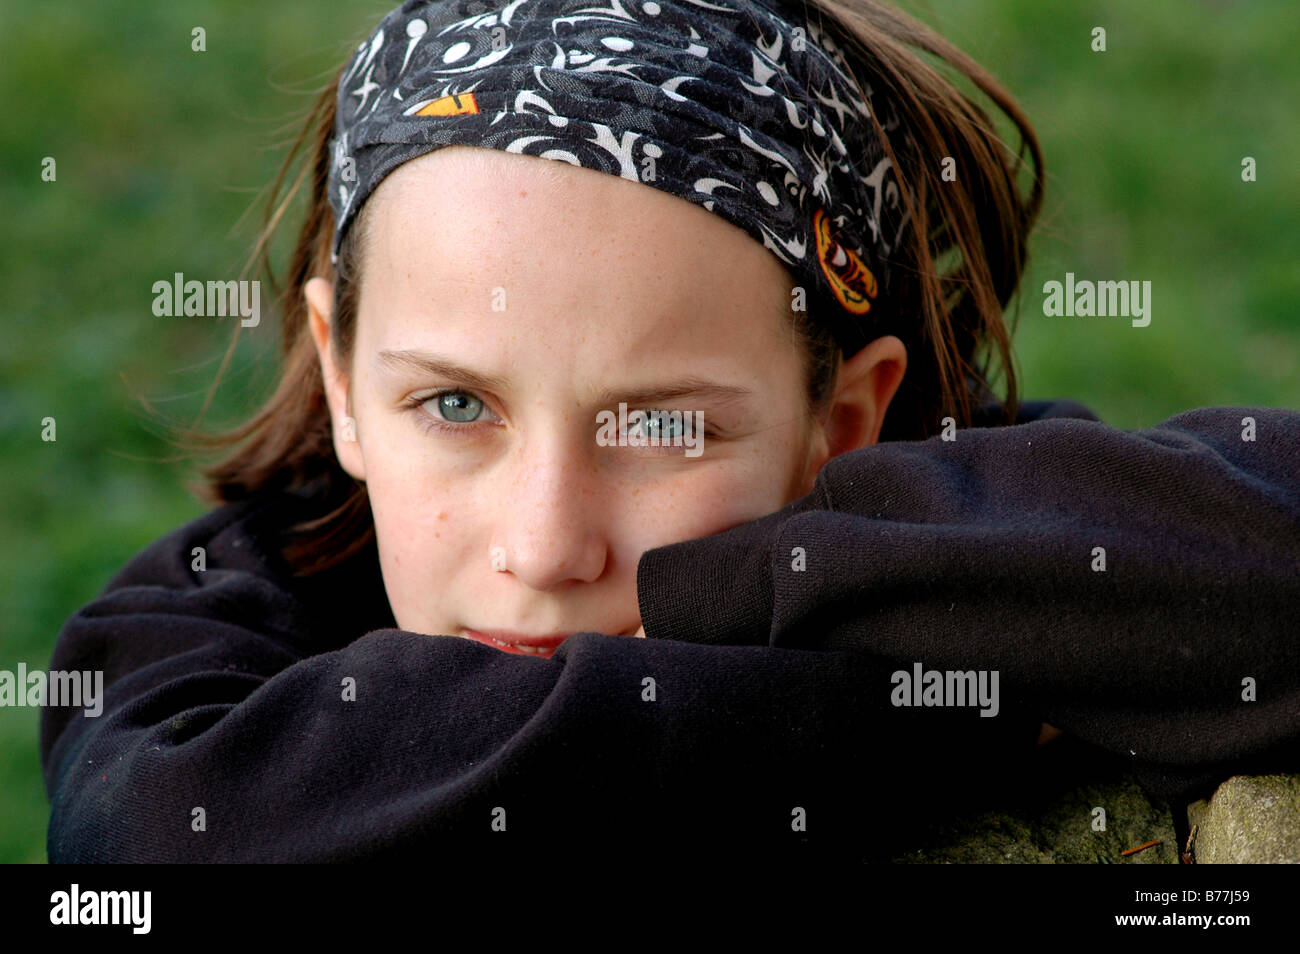 close up portrait of girl outdoors Stock Photo